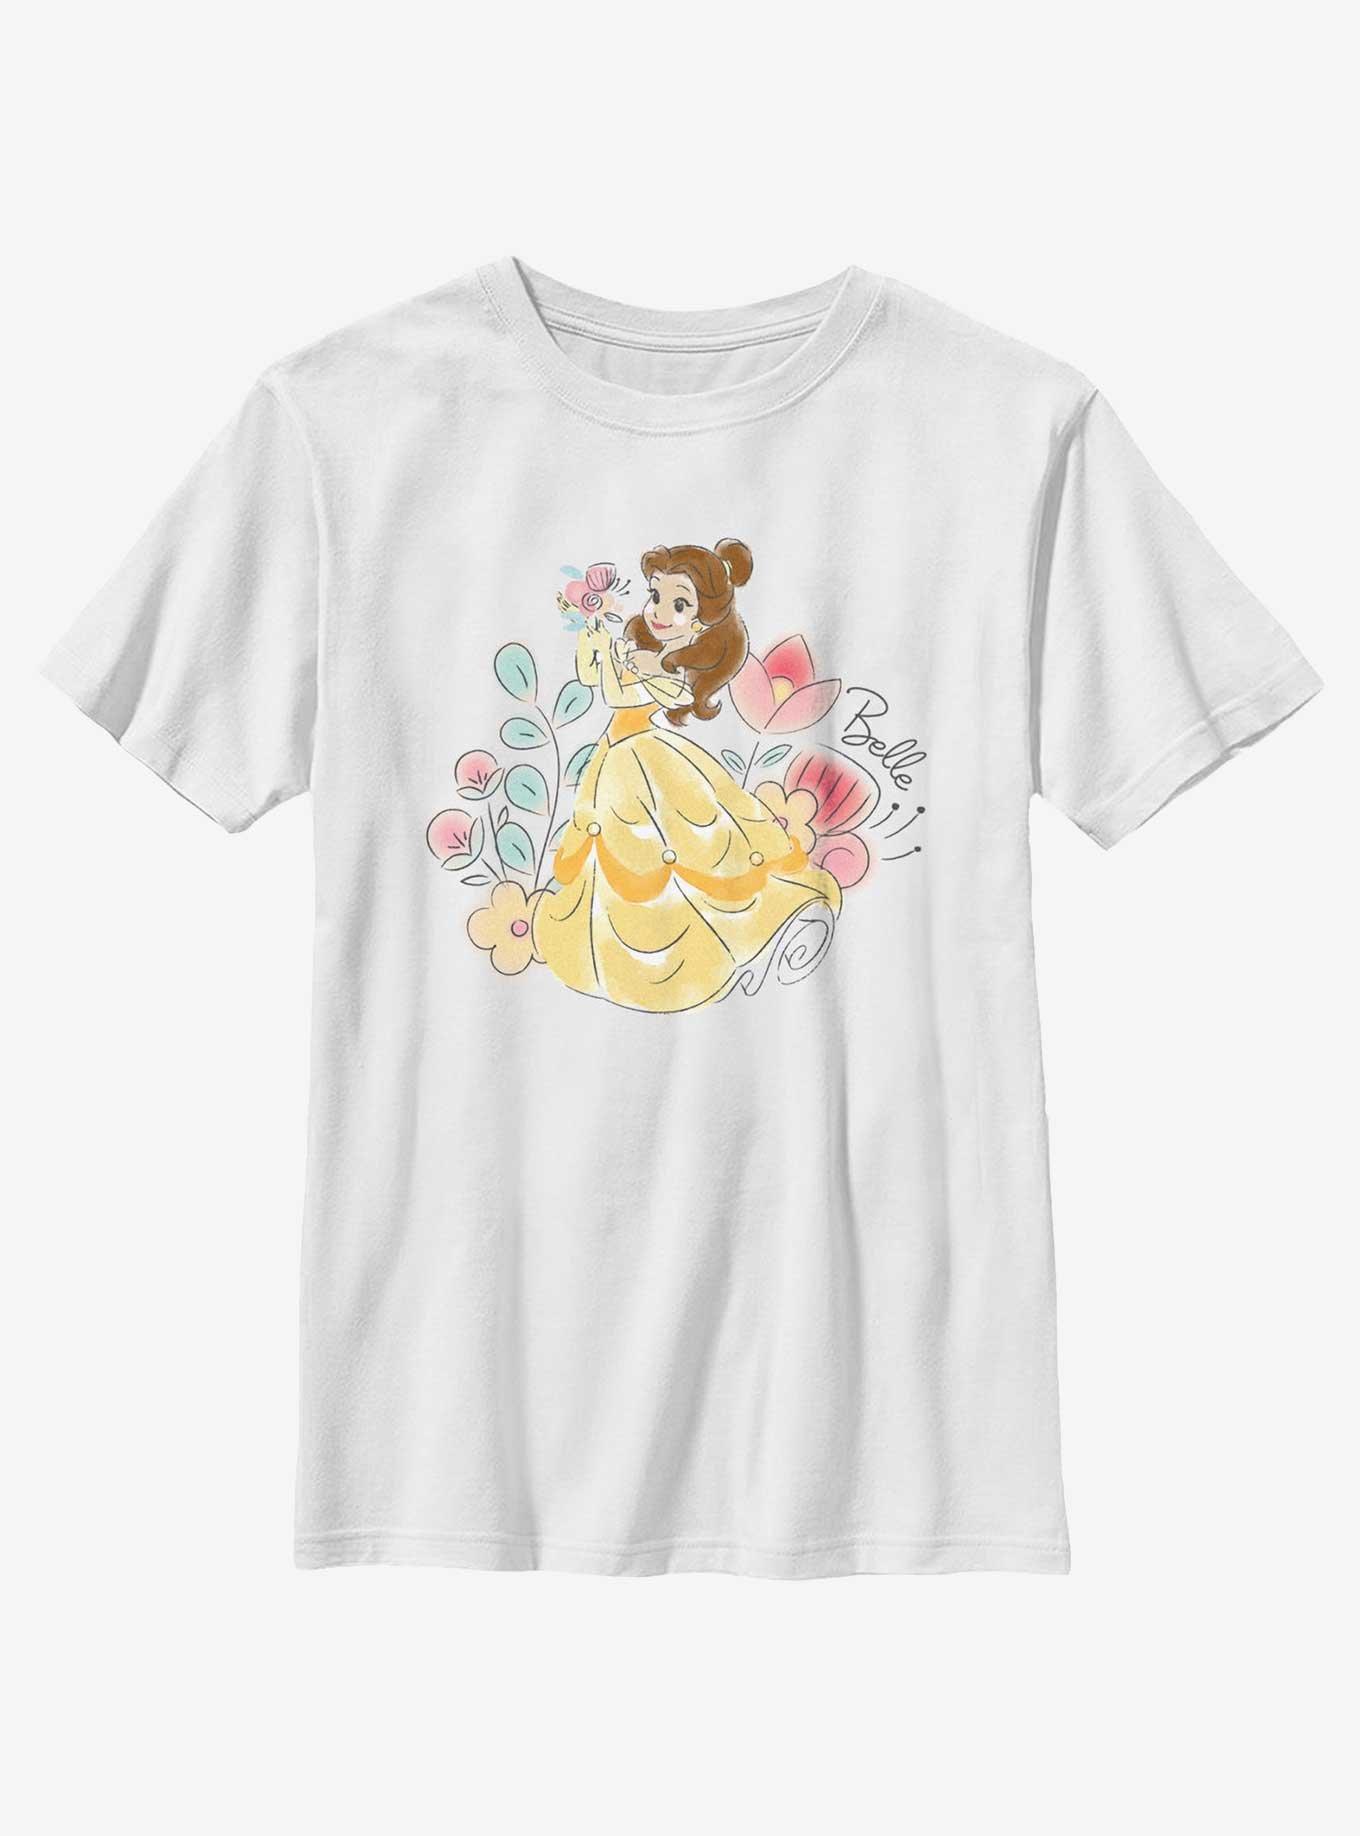 Disney Princesses Cute Belle With Flowers Youth T-Shirt, WHITE, hi-res